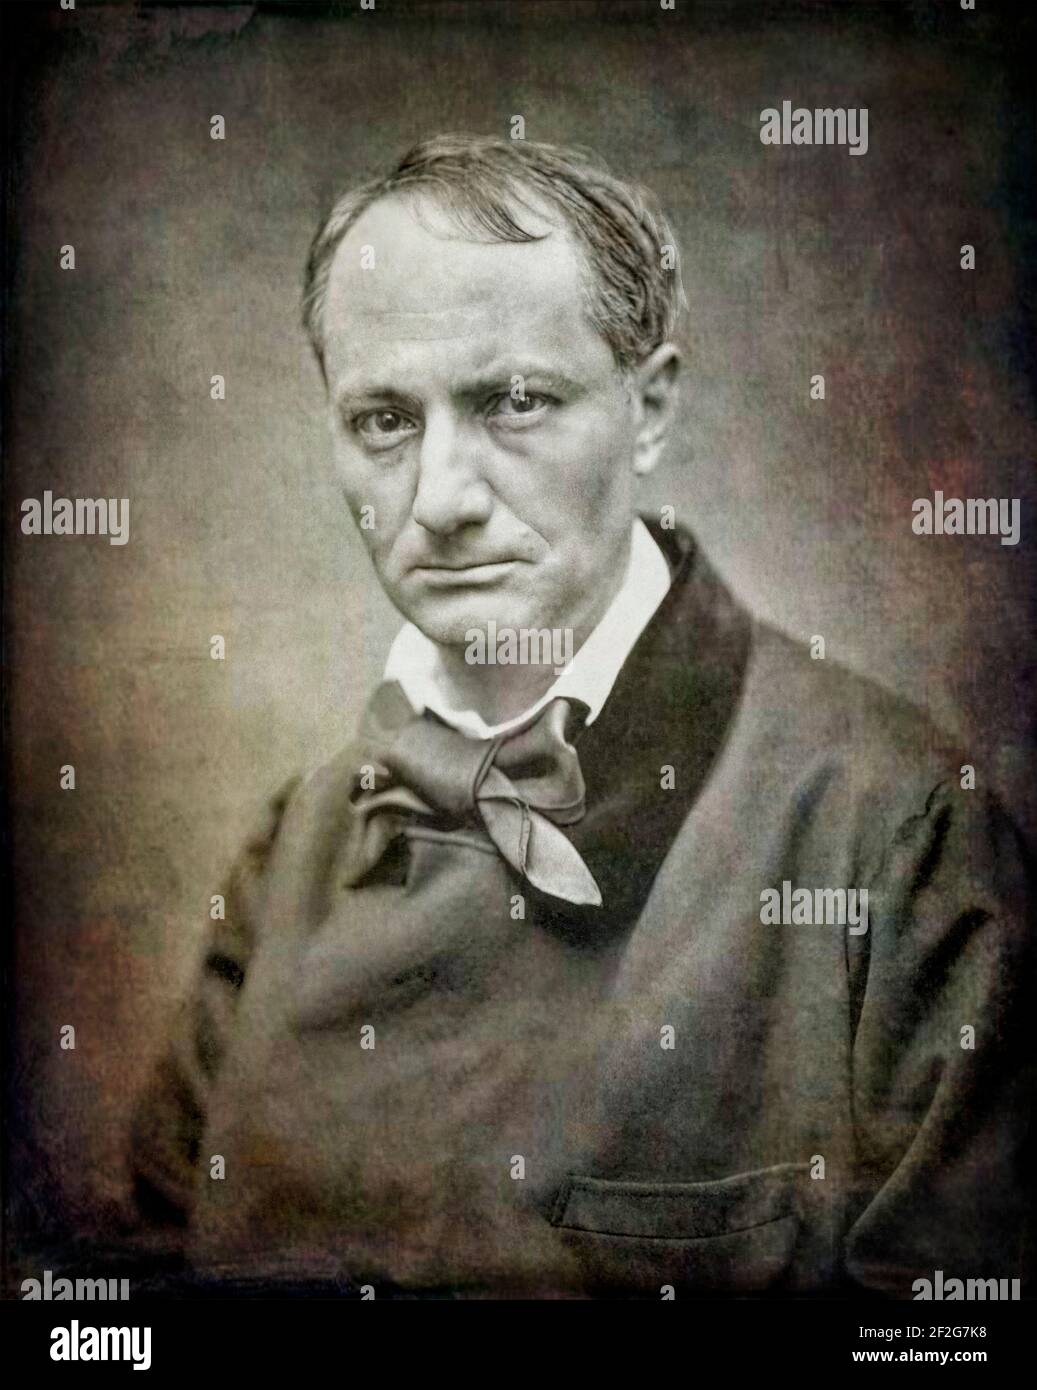 Charles Pierre Baudelaire, 1821 – 1867, French poet, portrait by Étienne Carjat, 1863, digitally altered Stock Photo